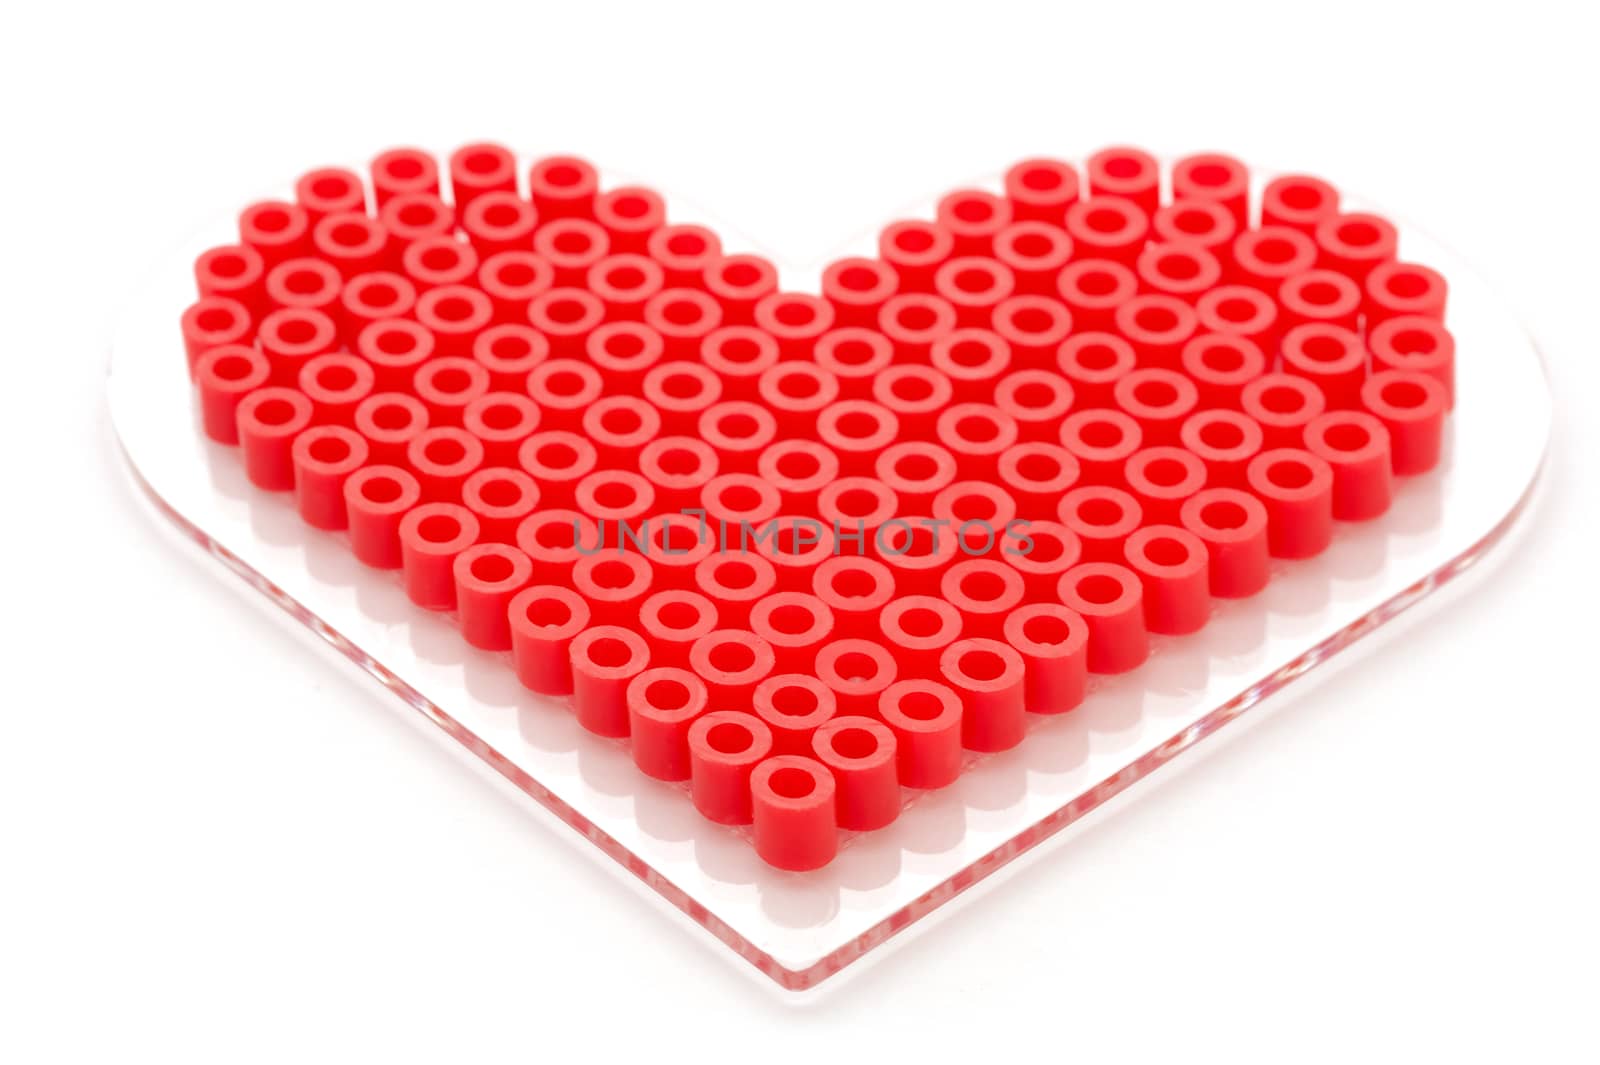 love heart made of decorative plastic beads on a white background